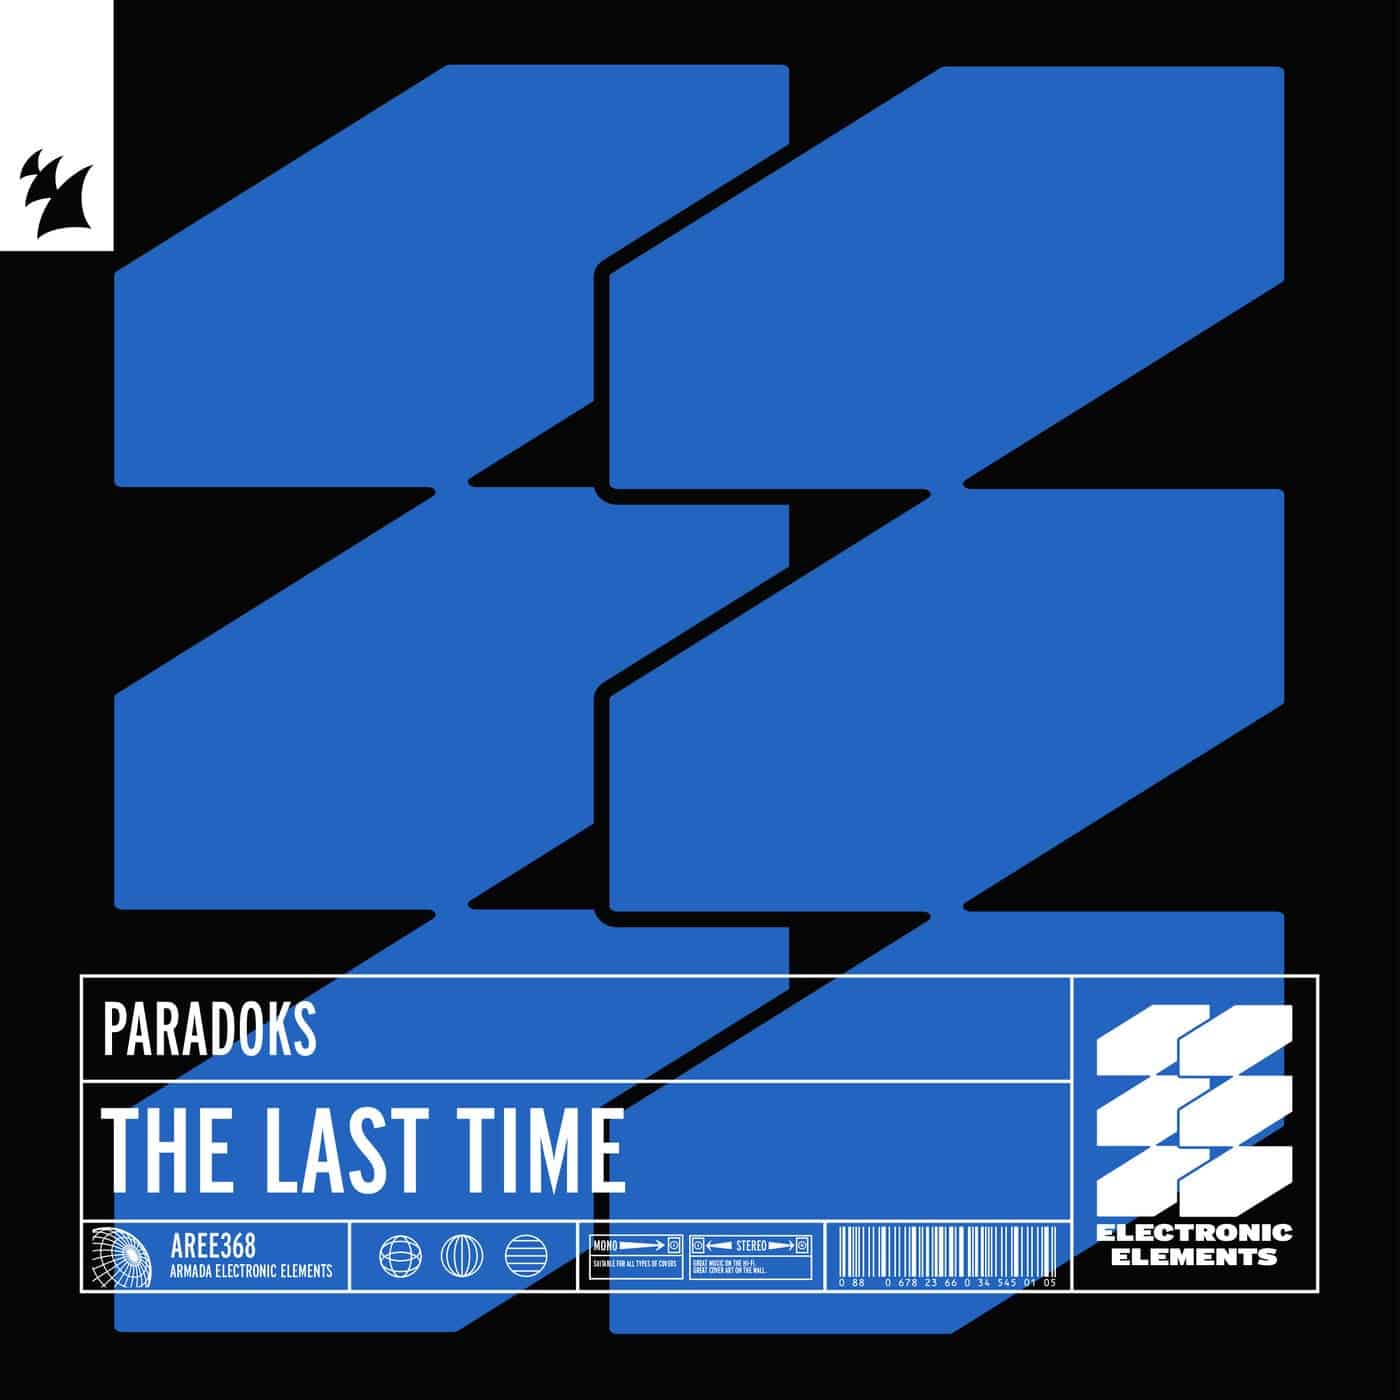 image cover: Paradoks - The Last Time on Armada Electronic Elements